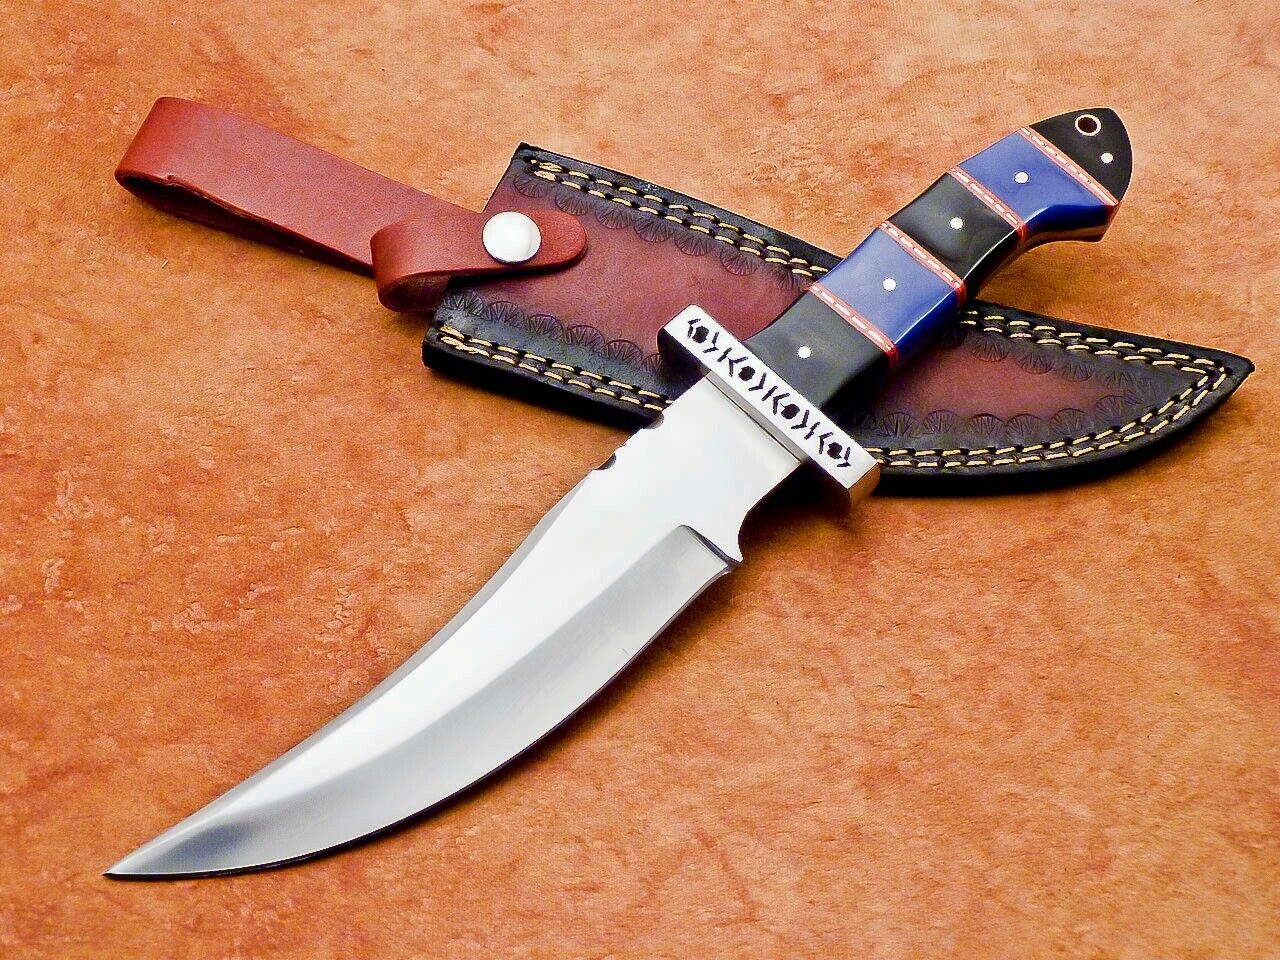 UNIQUE CUSTOM HAND FORGED D2 STEEL BLADE BOWIE HUNTING KNIFE, CAMEL BONE, 8330